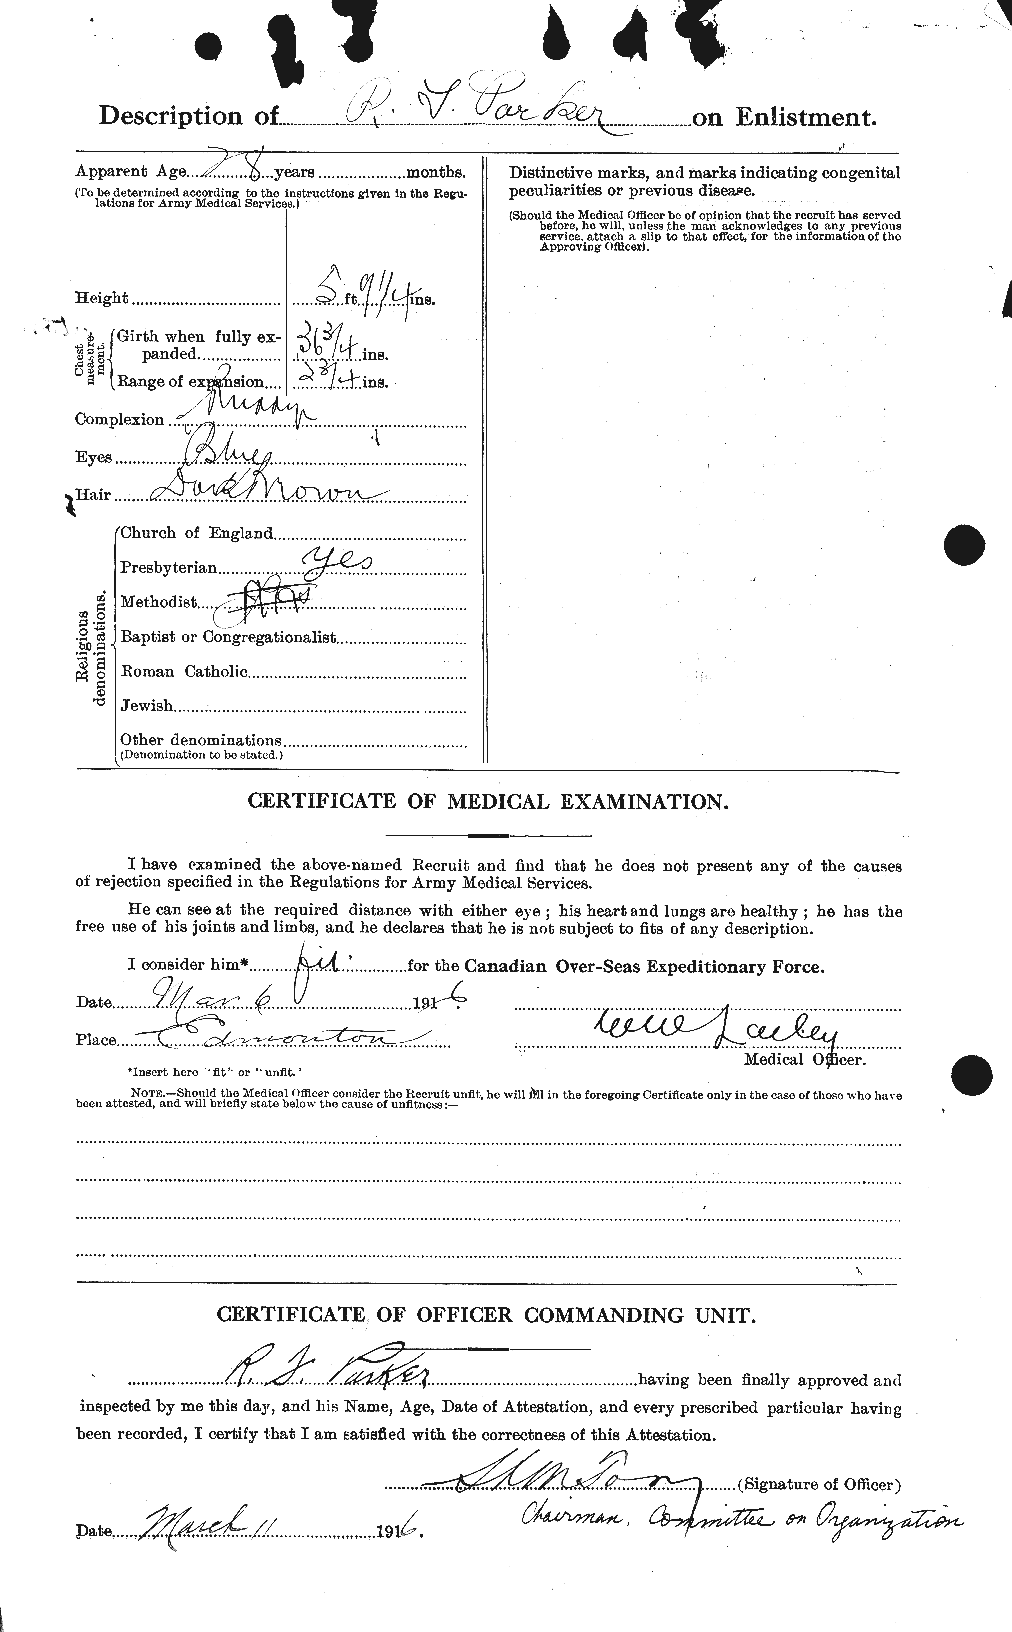 Personnel Records of the First World War - CEF 565577b